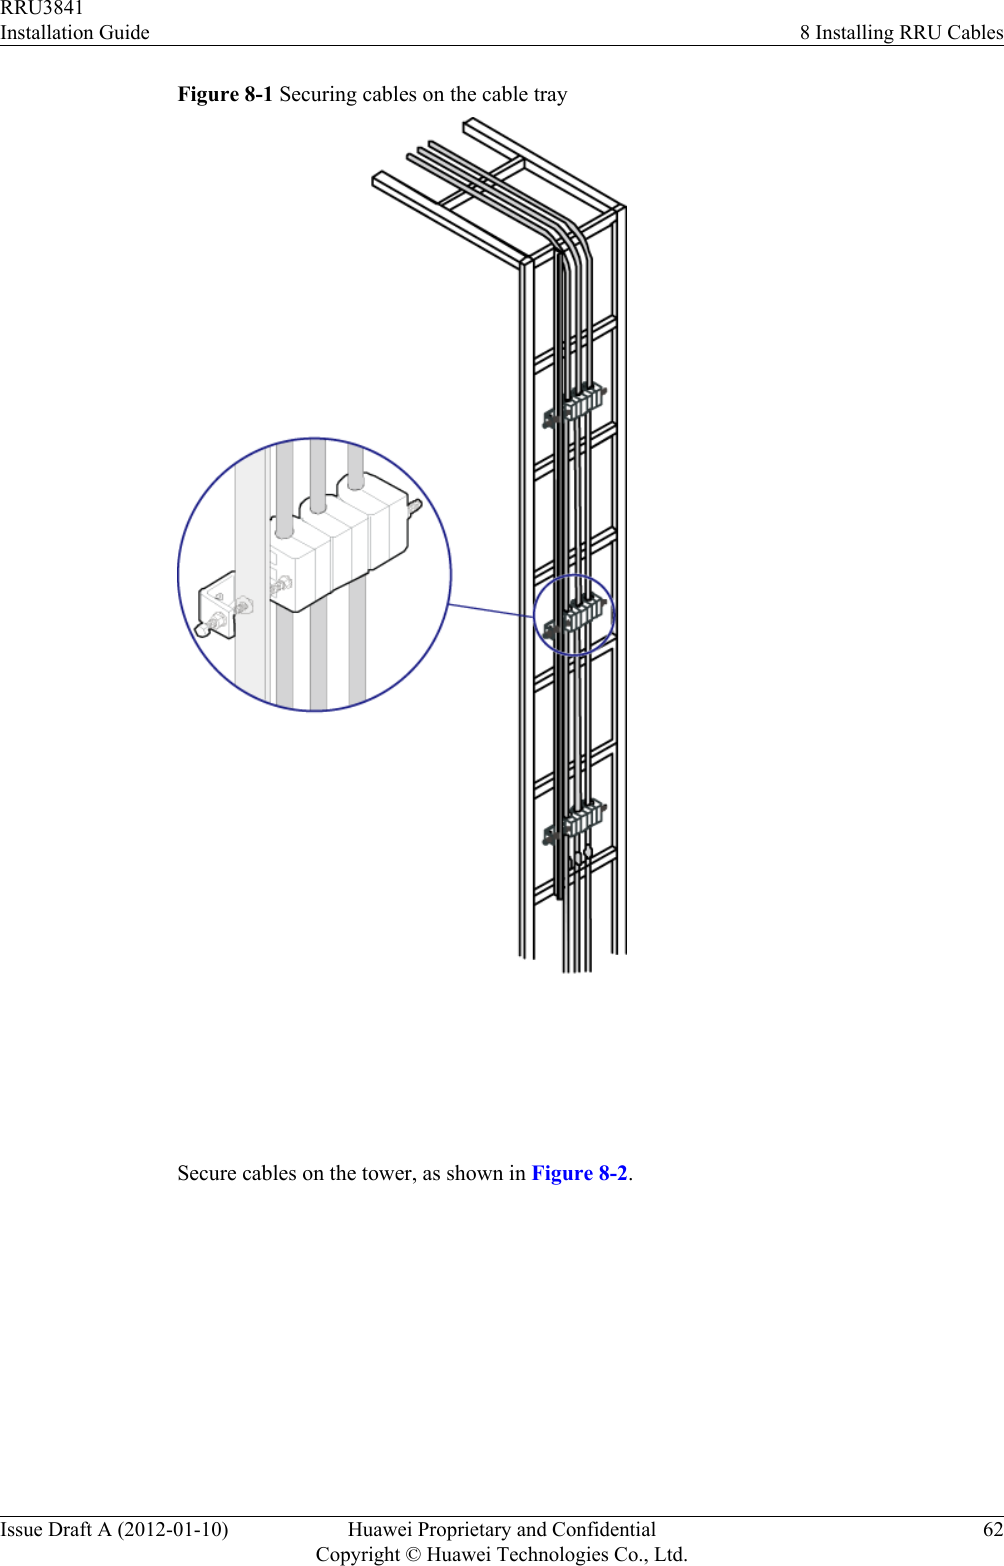 Figure 8-1 Securing cables on the cable tray Secure cables on the tower, as shown in Figure 8-2.RRU3841Installation Guide 8 Installing RRU CablesIssue Draft A (2012-01-10) Huawei Proprietary and ConfidentialCopyright © Huawei Technologies Co., Ltd.62